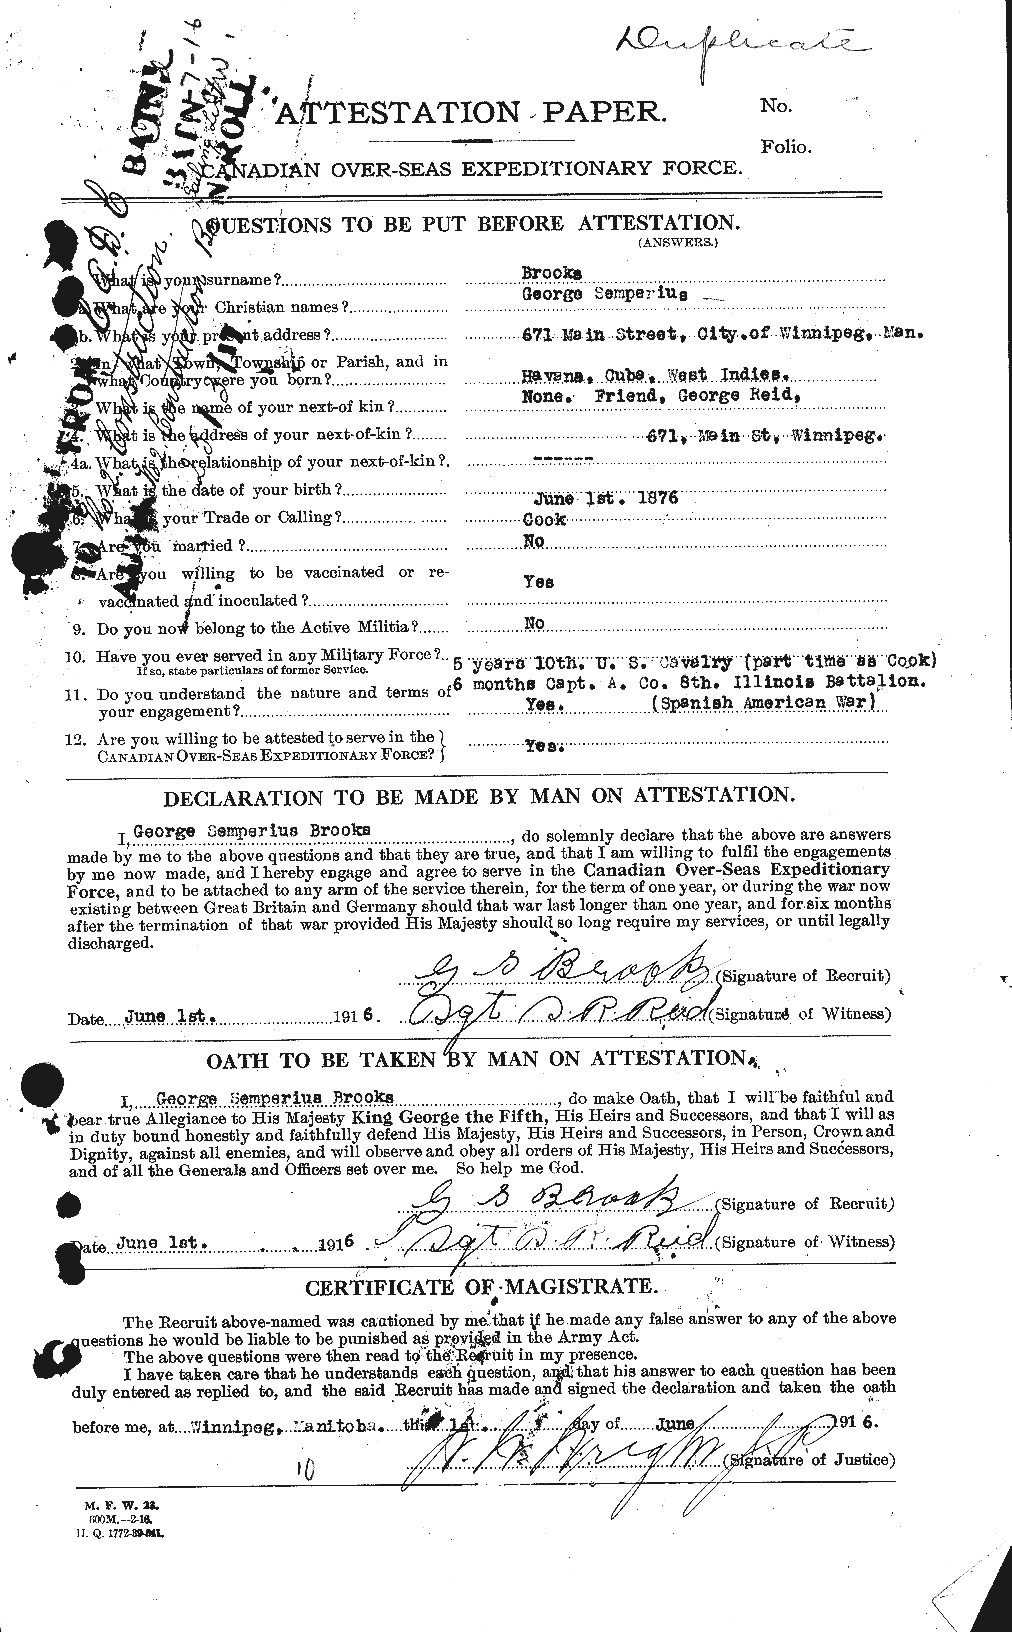 Personnel Records of the First World War - CEF 261663a